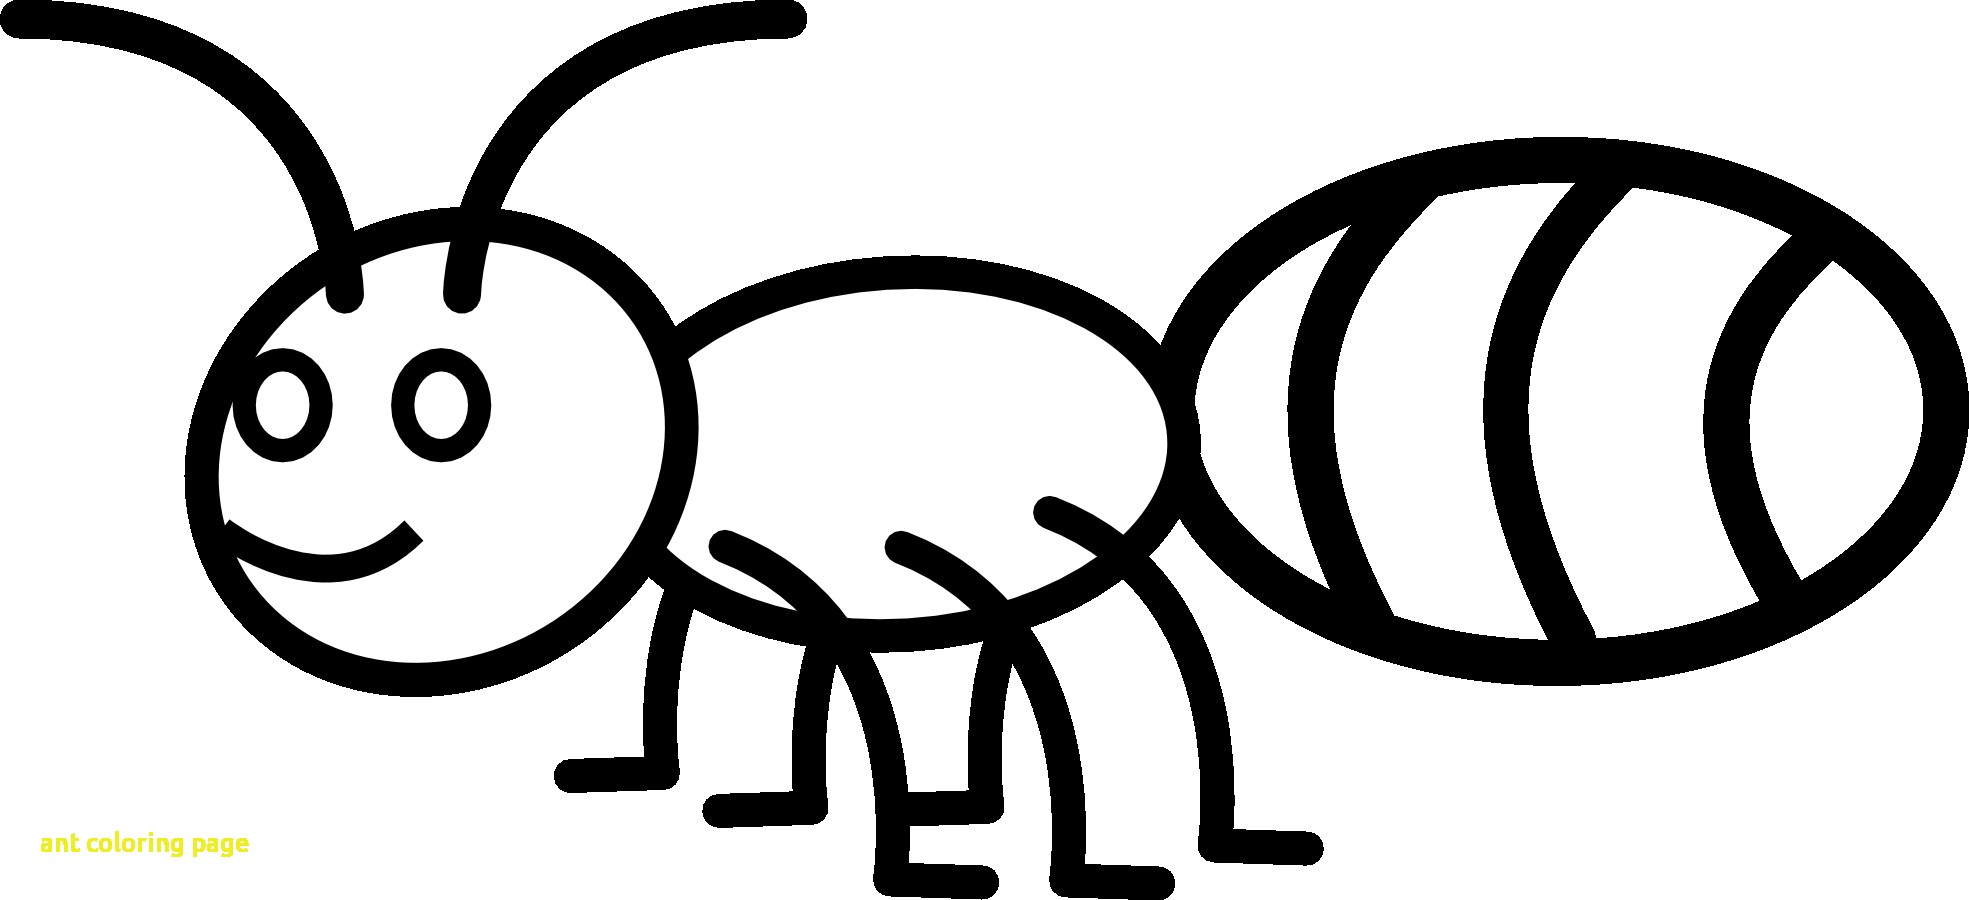 Ants clipart printable. Classic ant coloring page